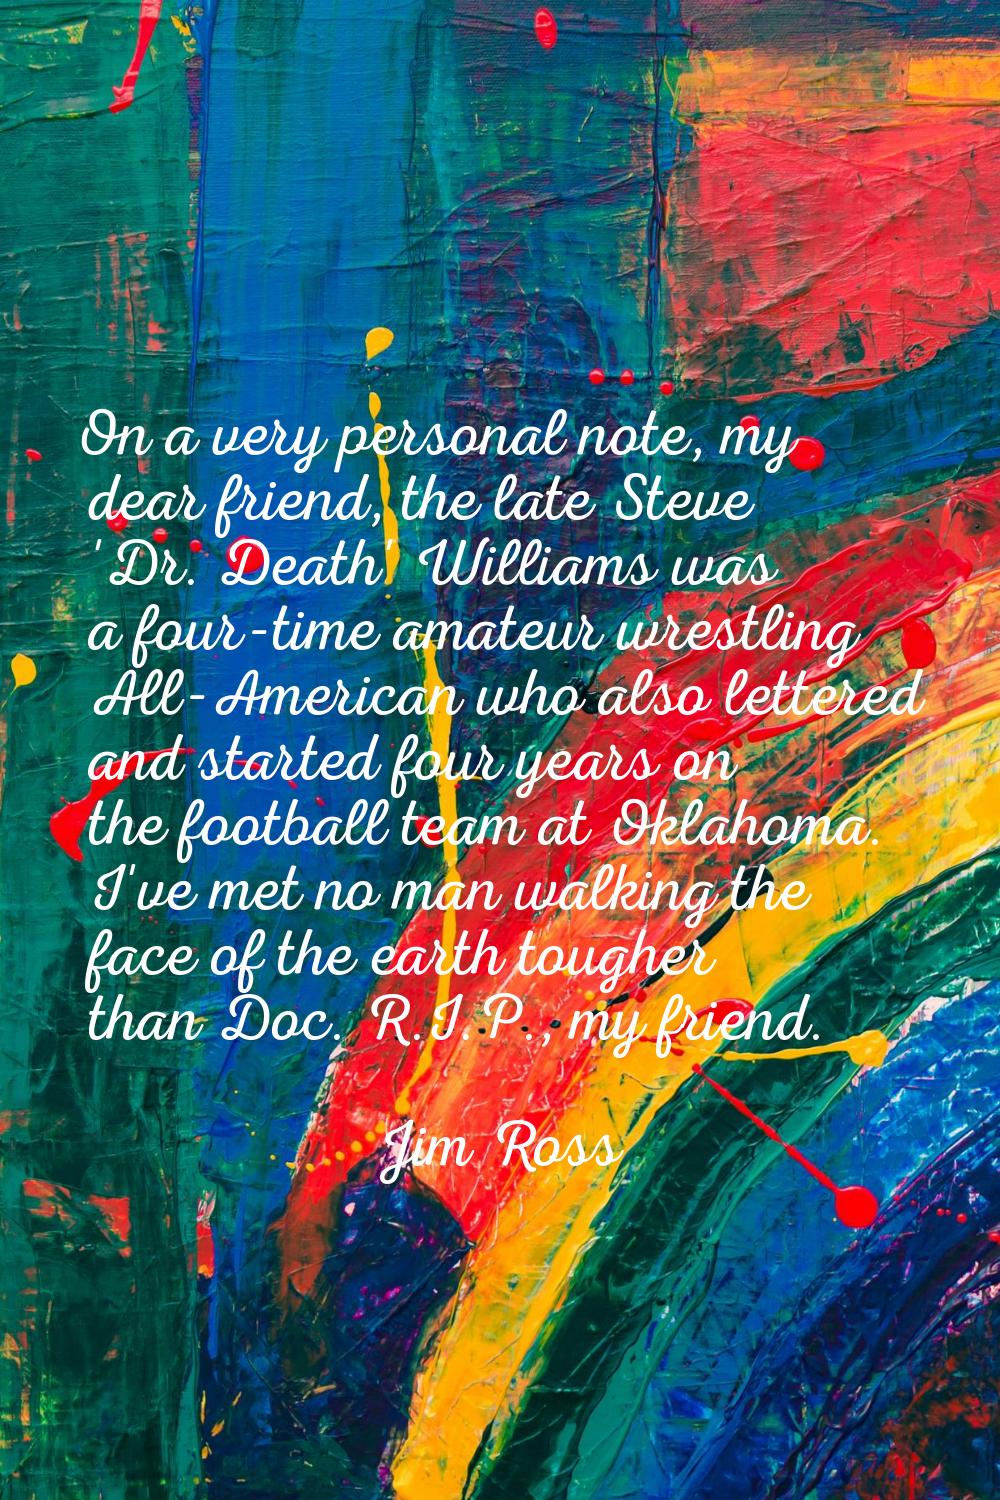 On a very personal note, my dear friend, the late Steve 'Dr. Death' Williams was a four-time amateu